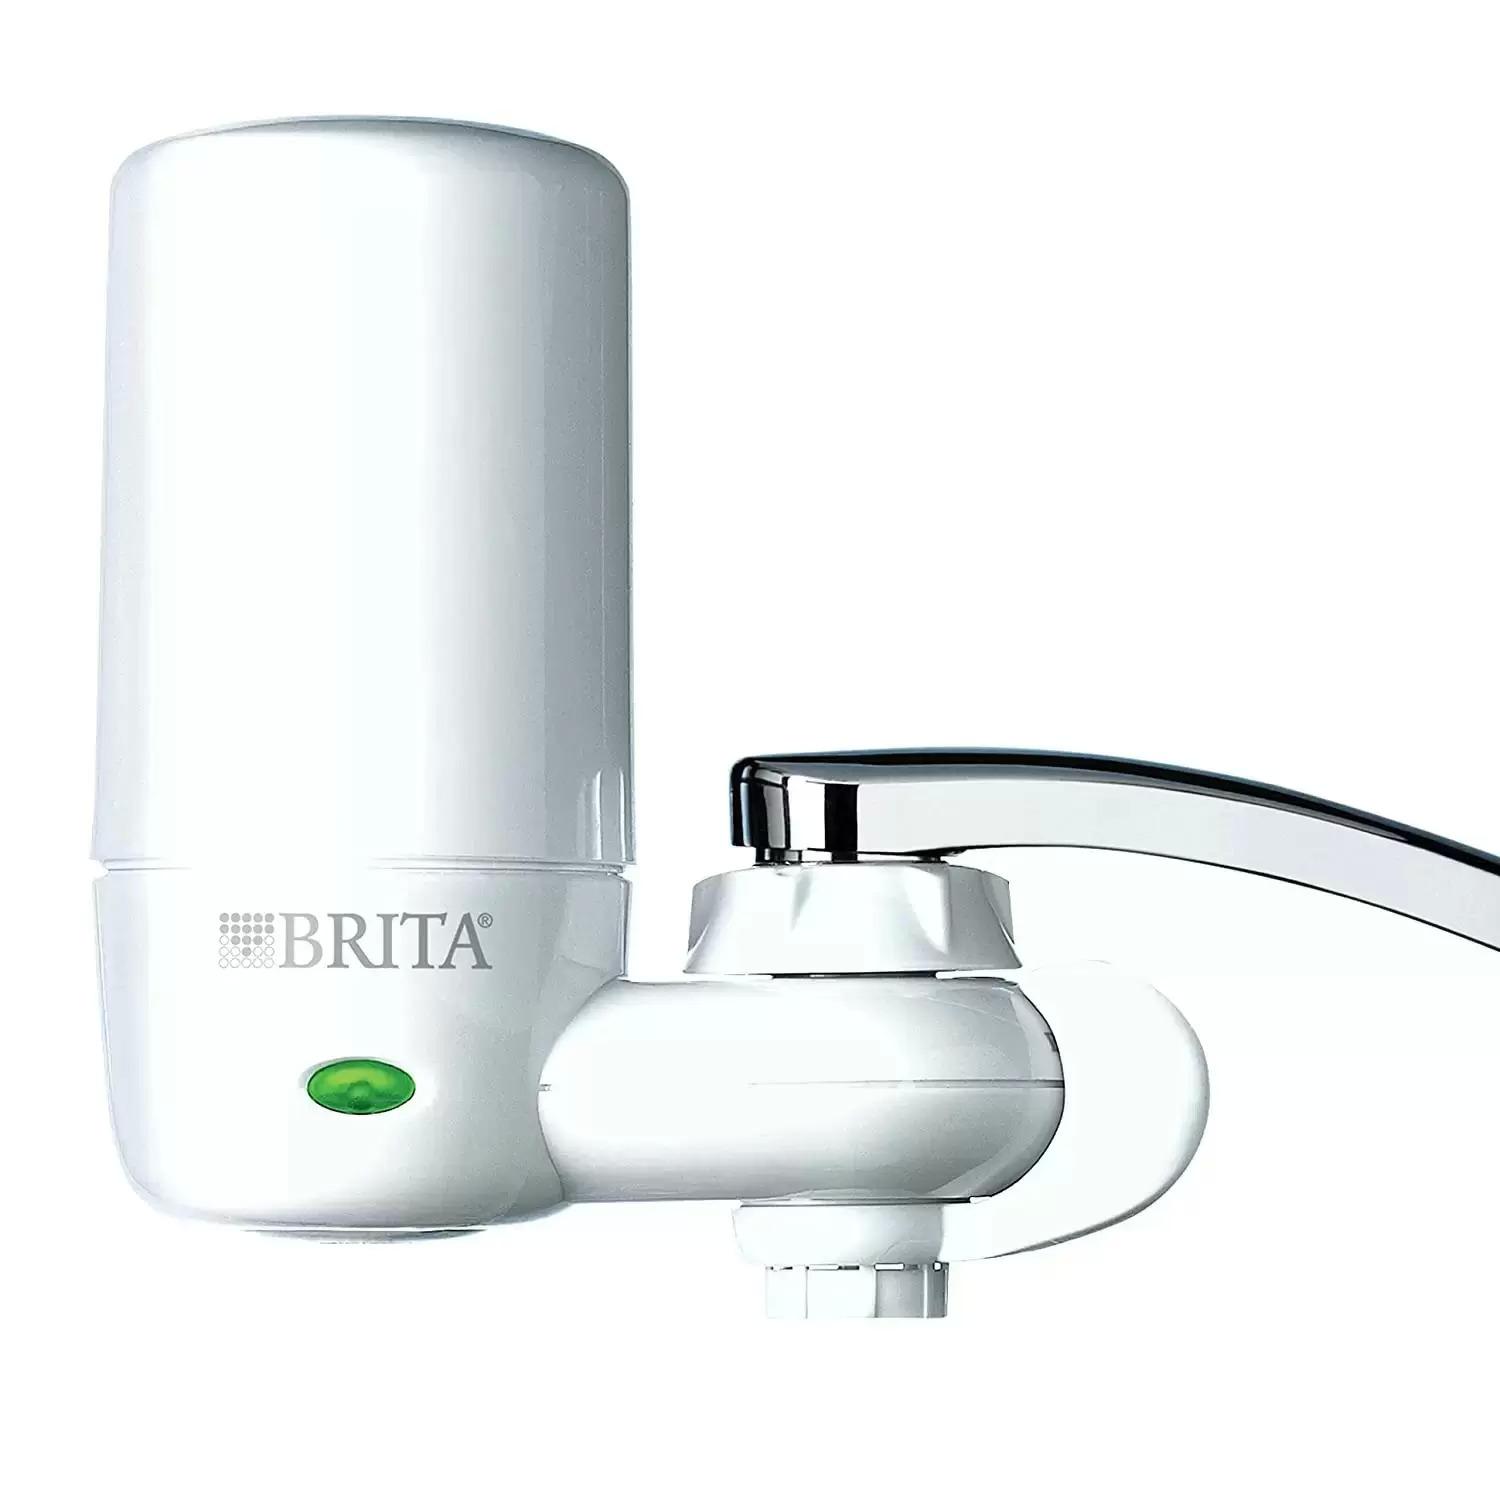 Brita Complete Sink Faucet Mount Water Filtration System for $14.79